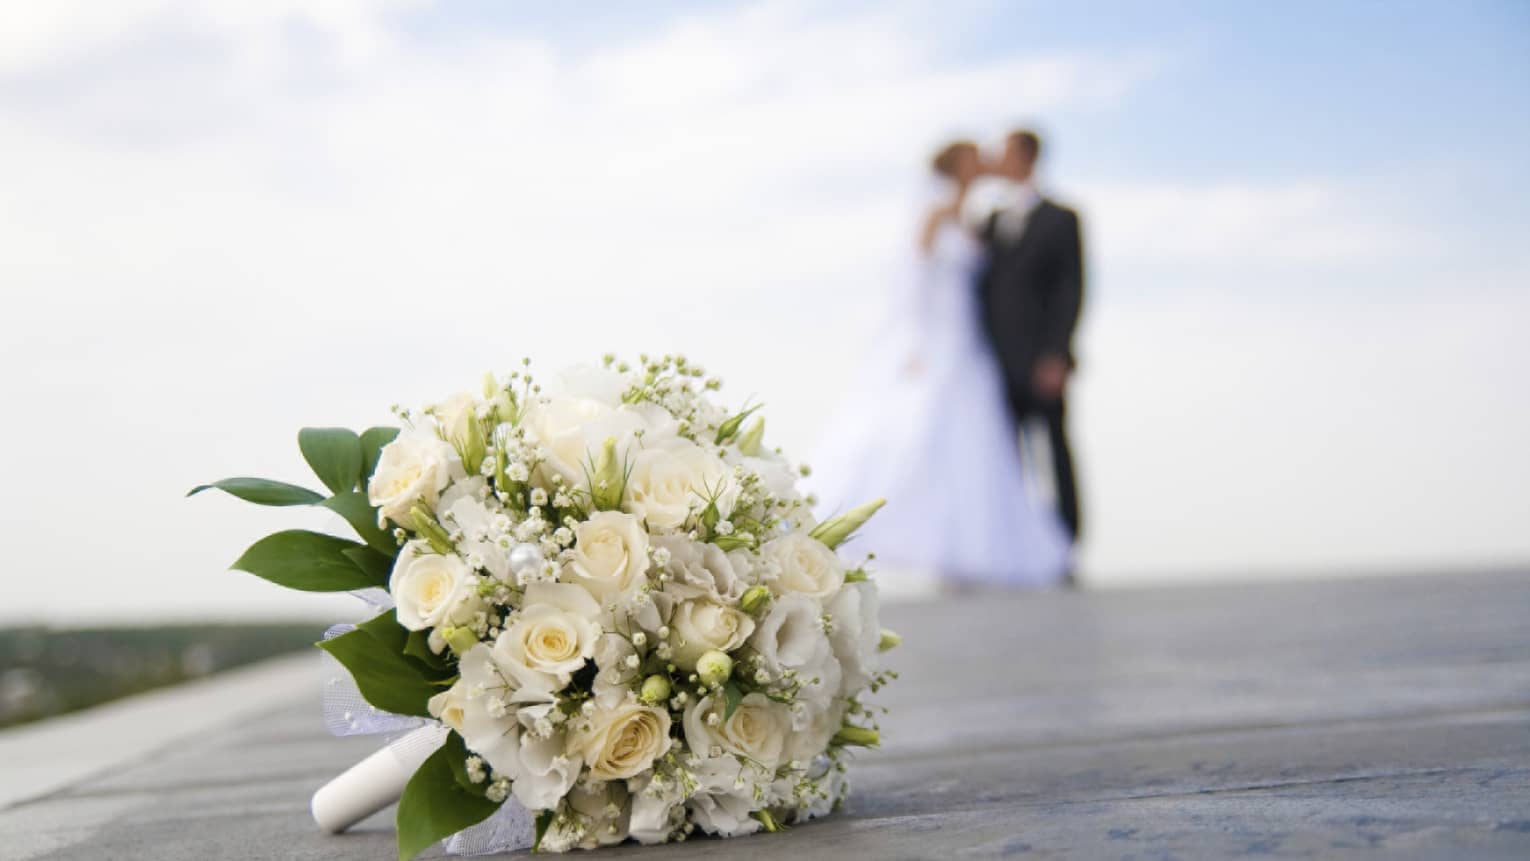 White floral wedding bouquet on ground, bride and groom kissing in background